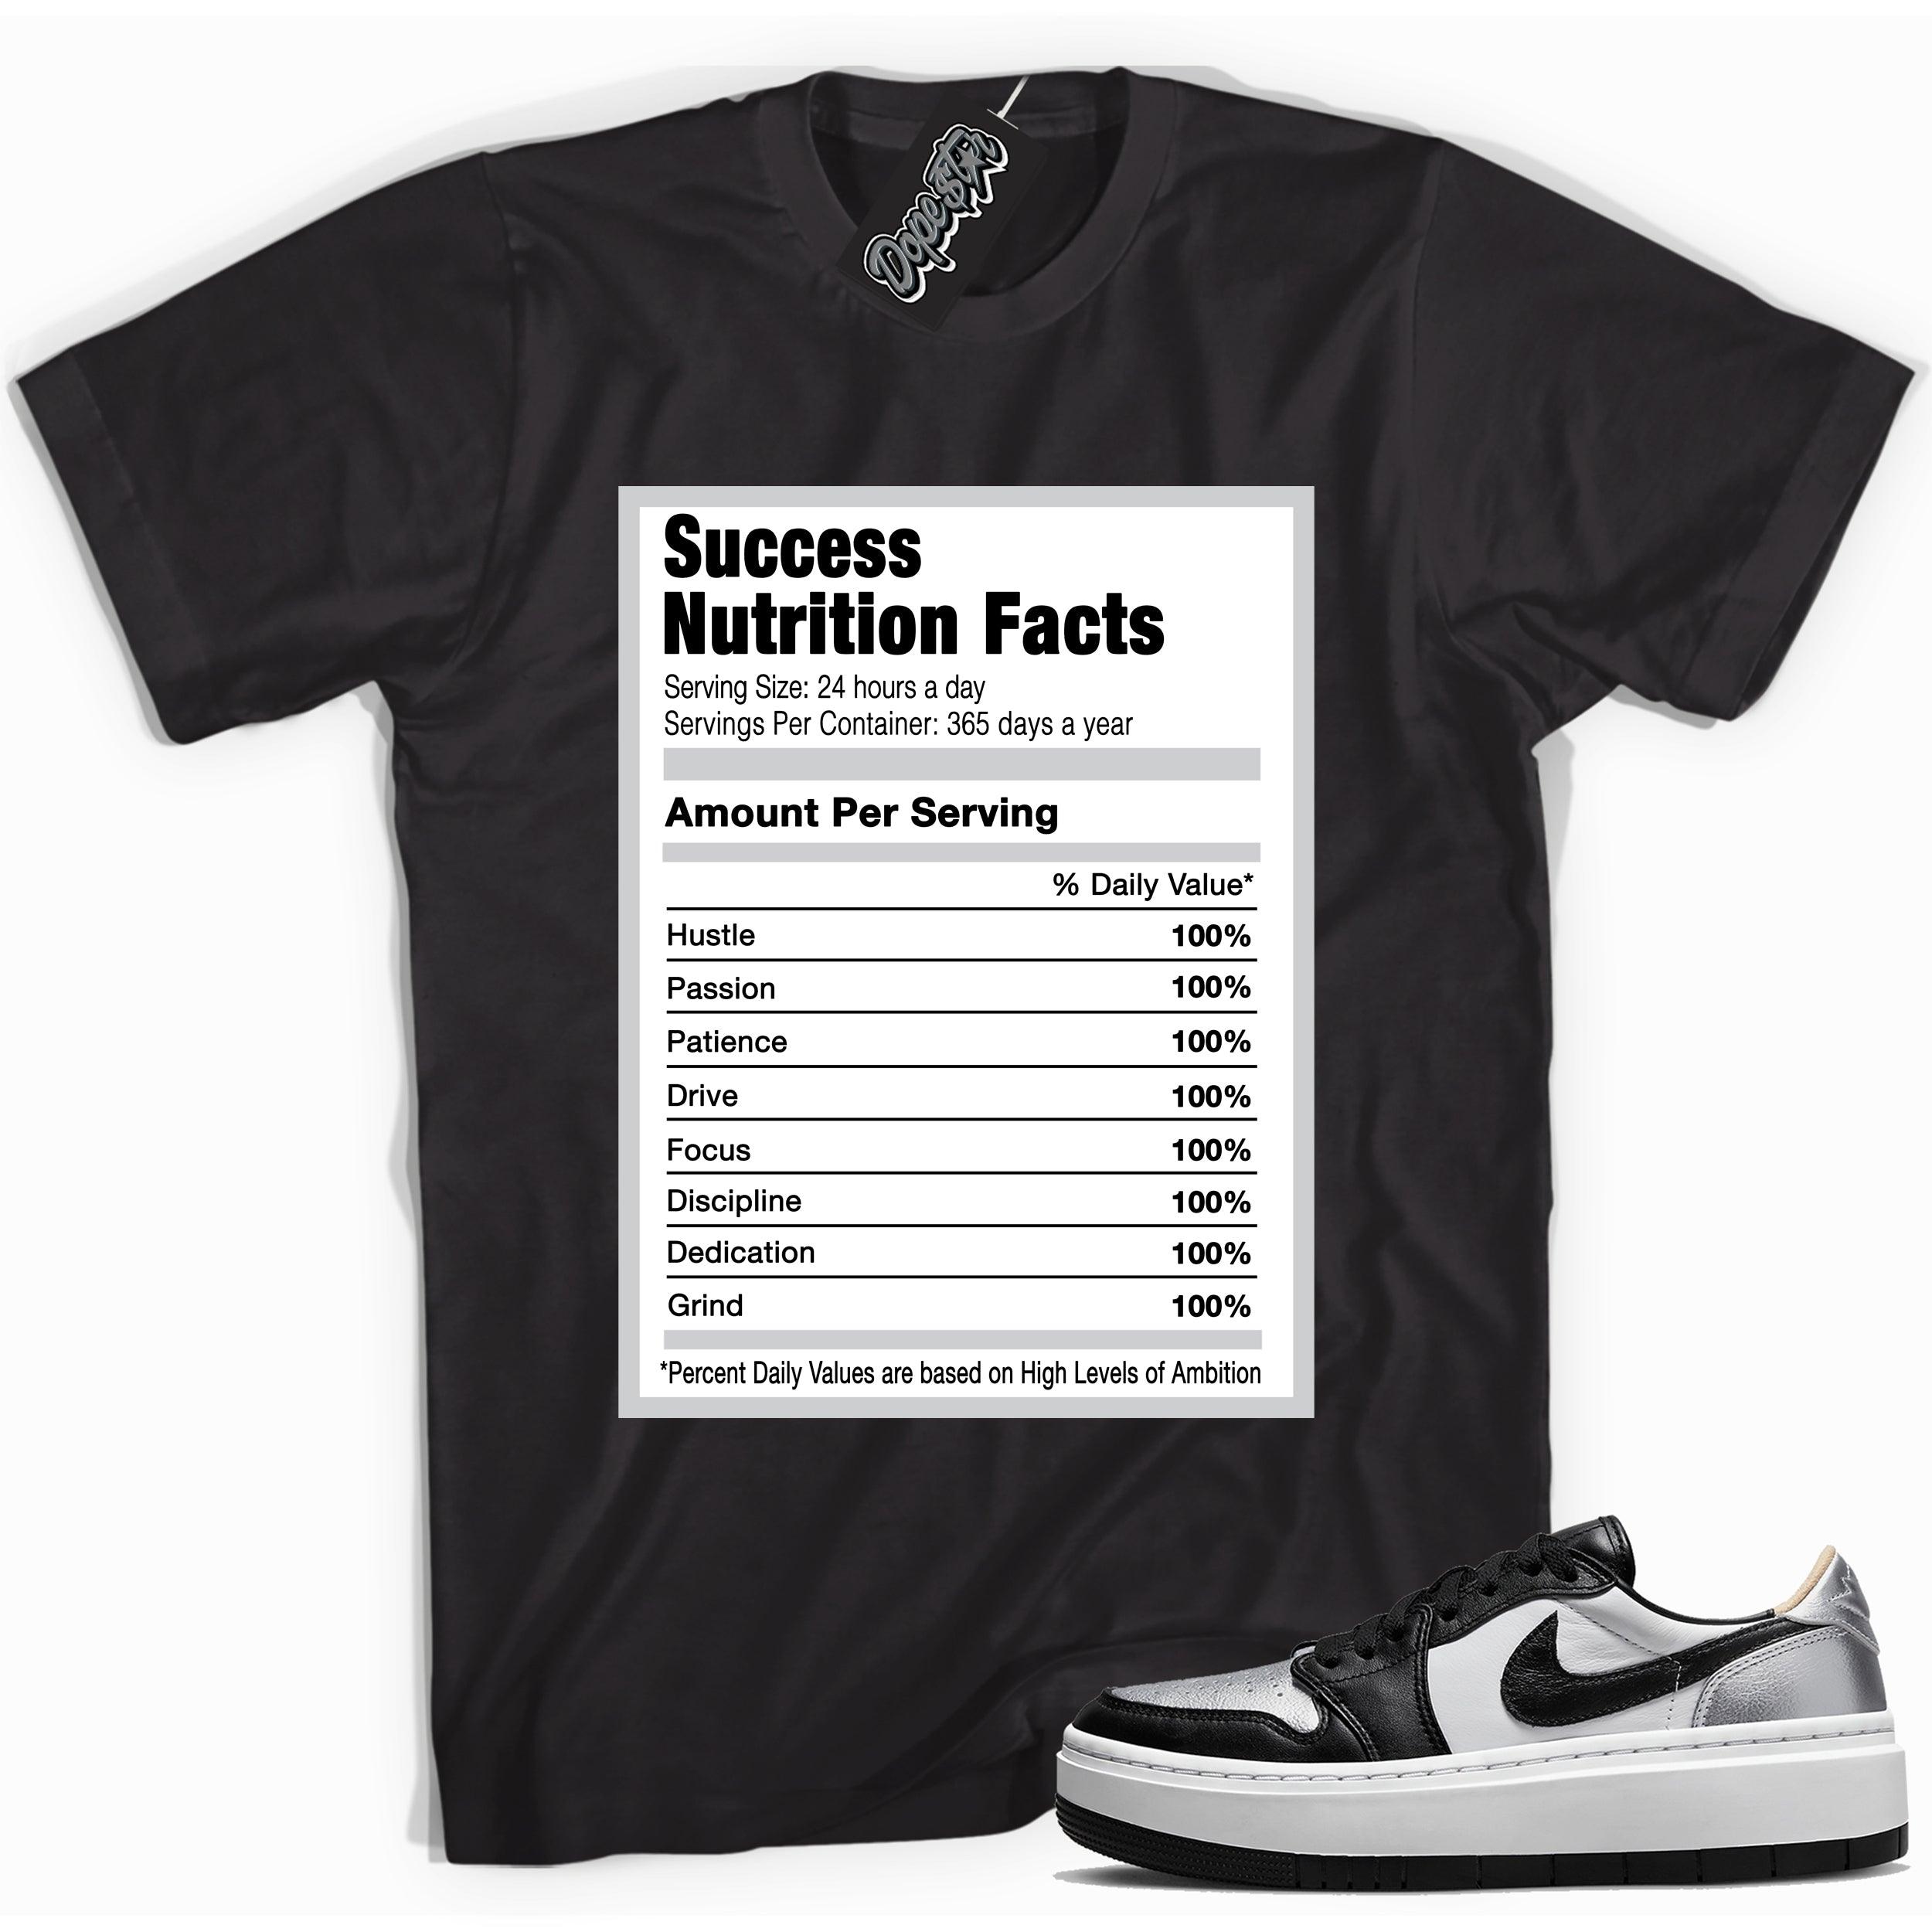 Cool black graphic tee with 'success nutrition facts' print, that perfectly matches Air Jordan 1 Elevate Low SE Silver Toe sneakers.